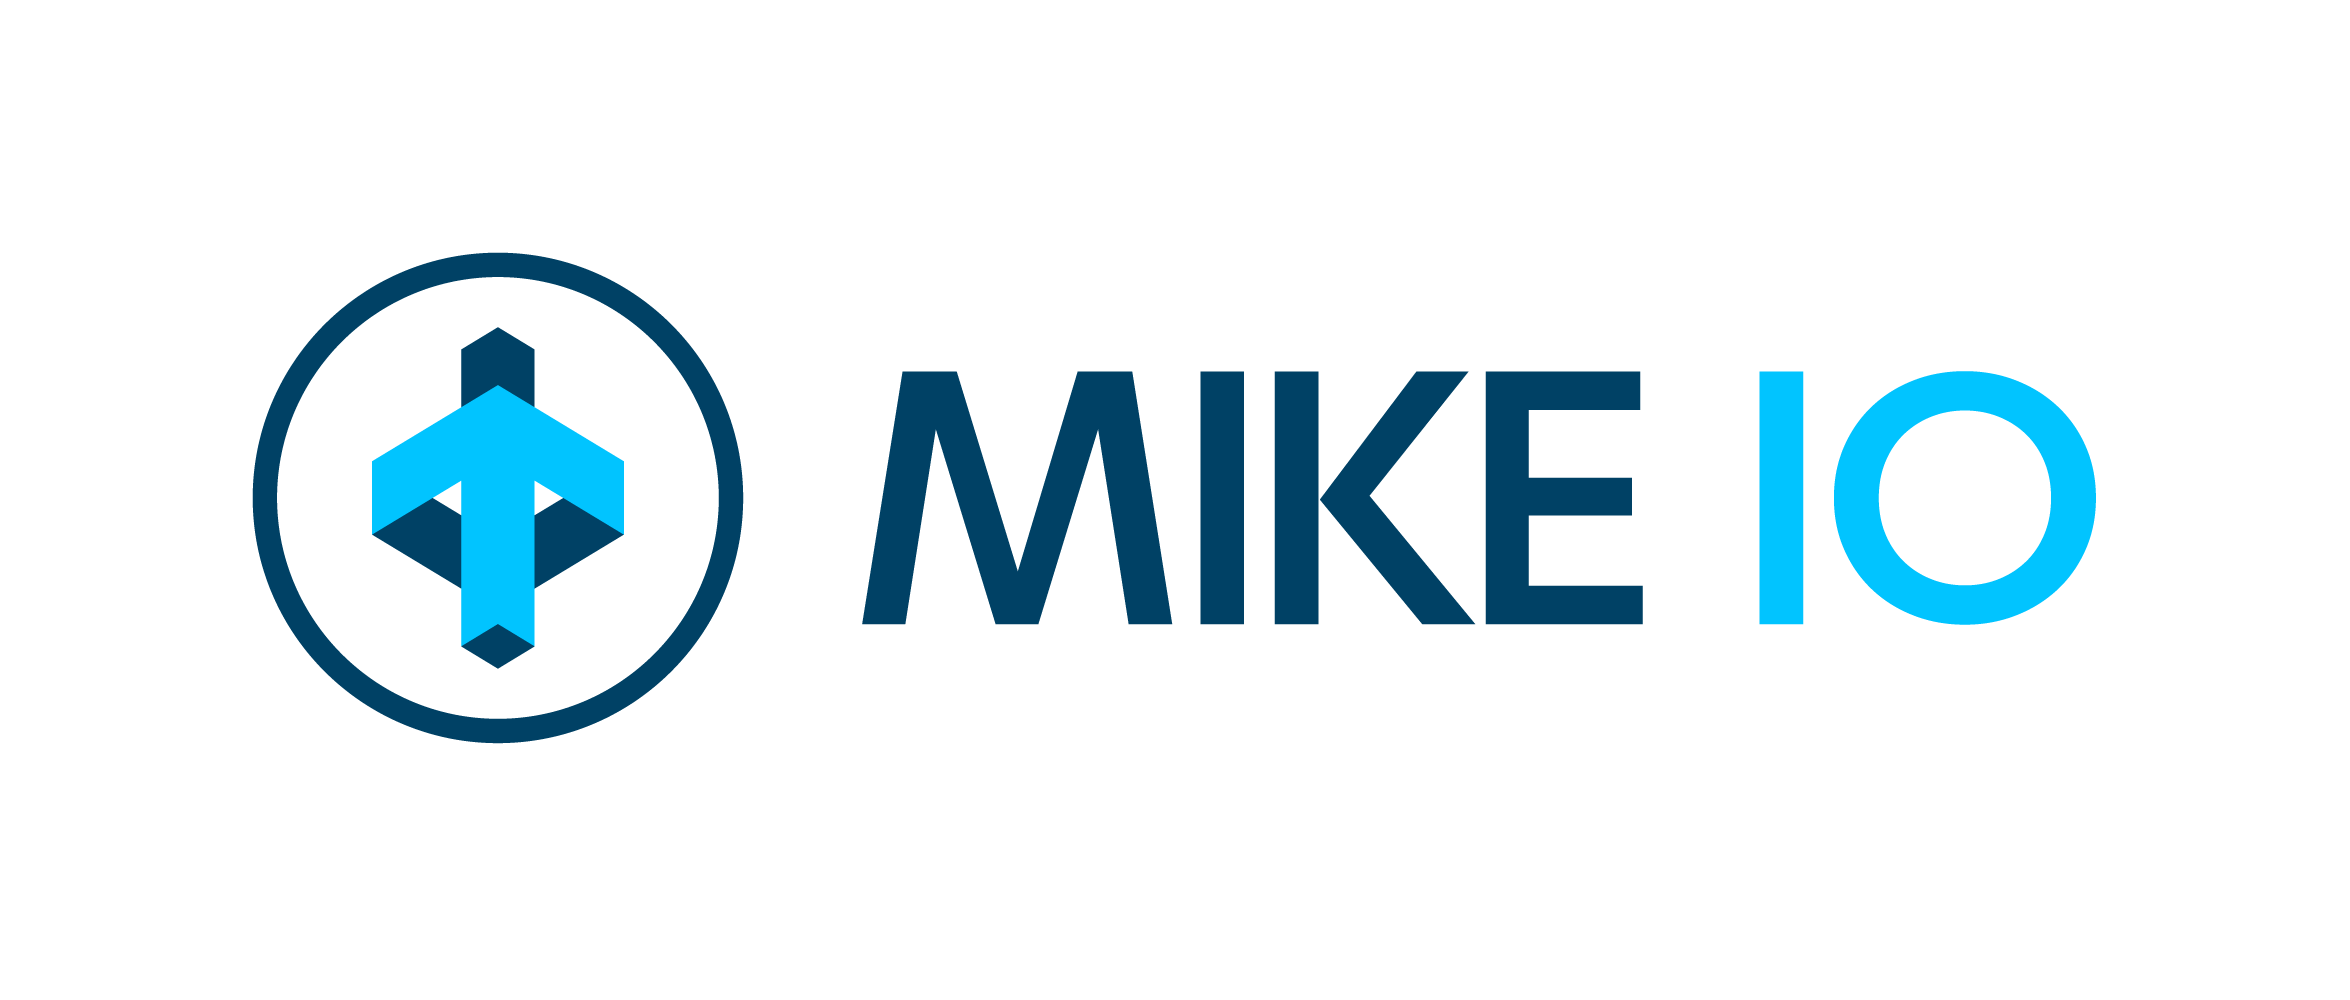 Getting started with Dfs files in Python using MIKE IO - Home